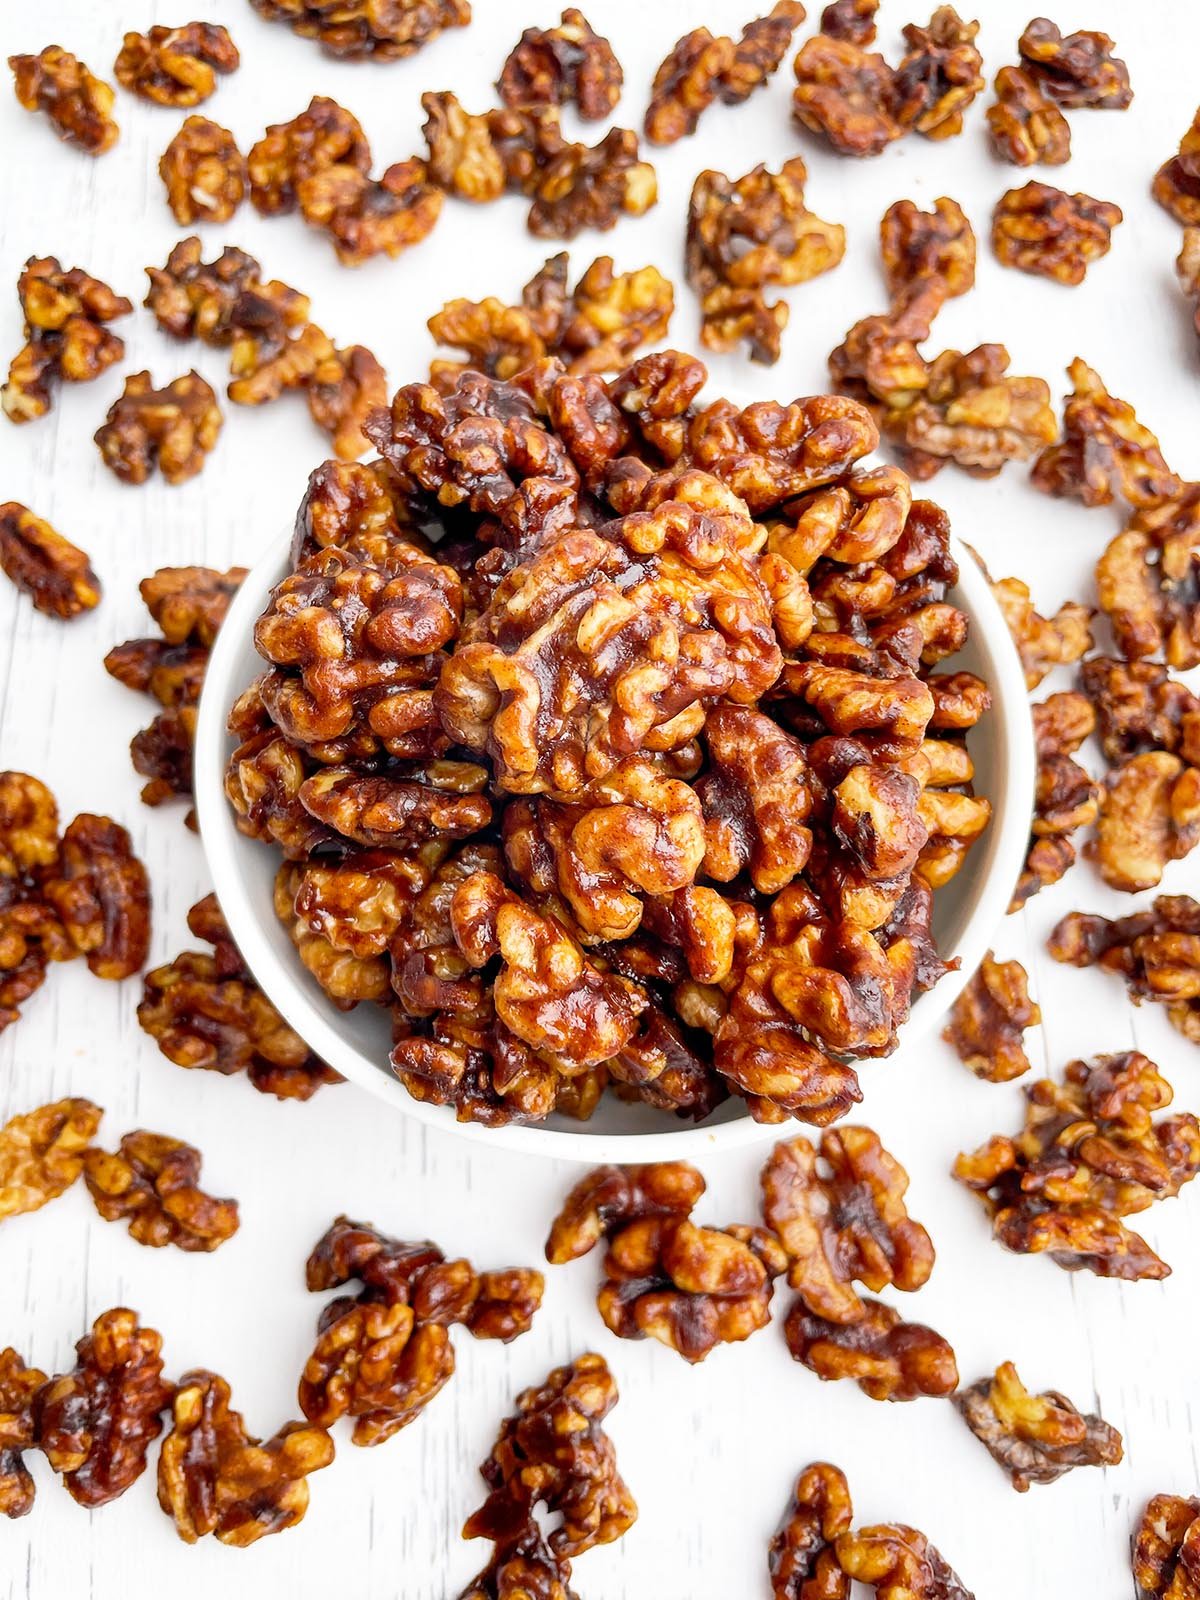 brown sugar candied walnuts in a white bowl on a surrounded by walnuts on a white countertop.